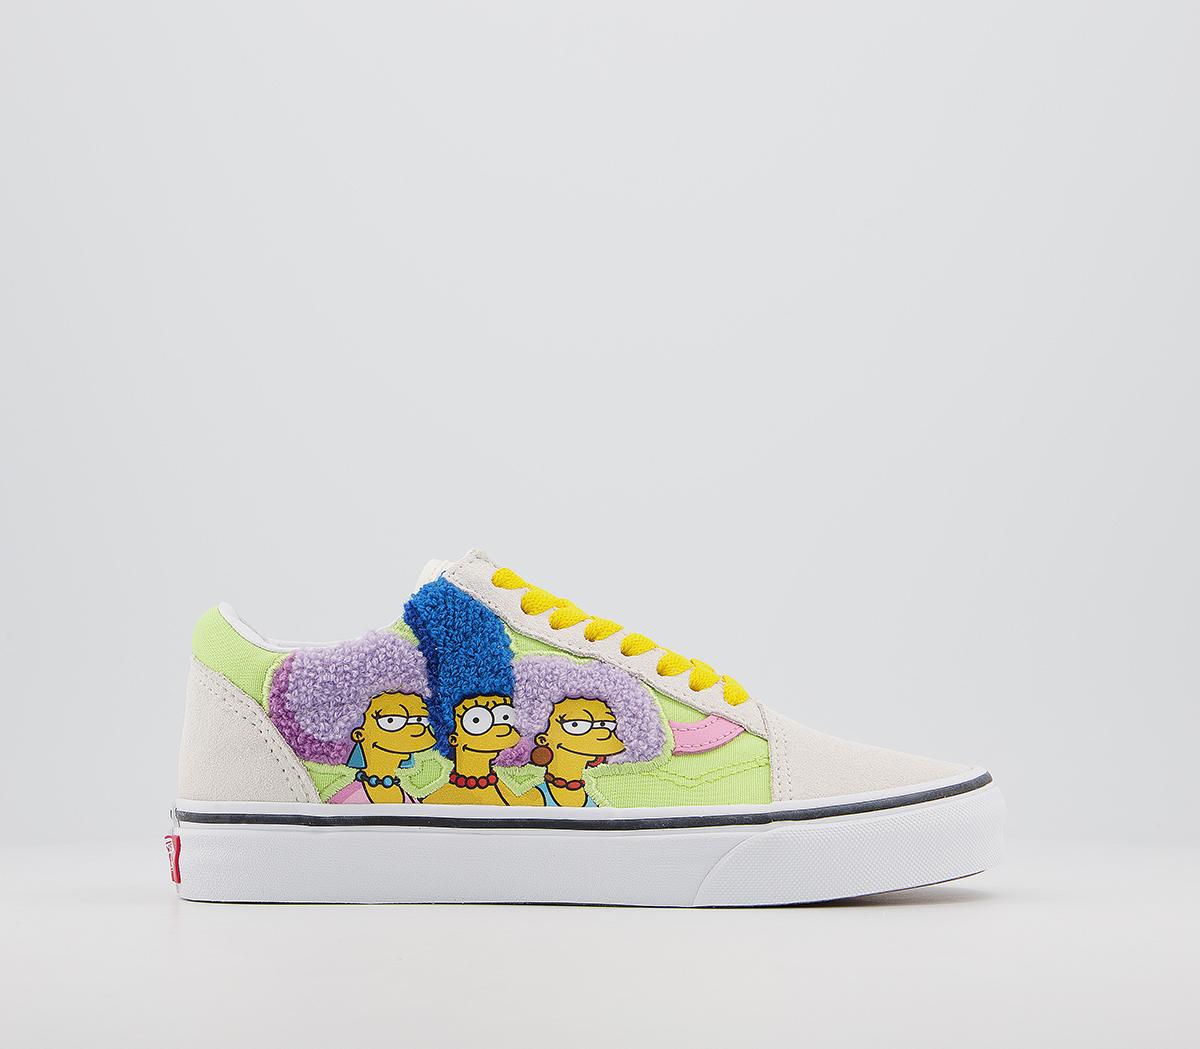 VansOld Skool TrainersThe Simpsons The Bouviers